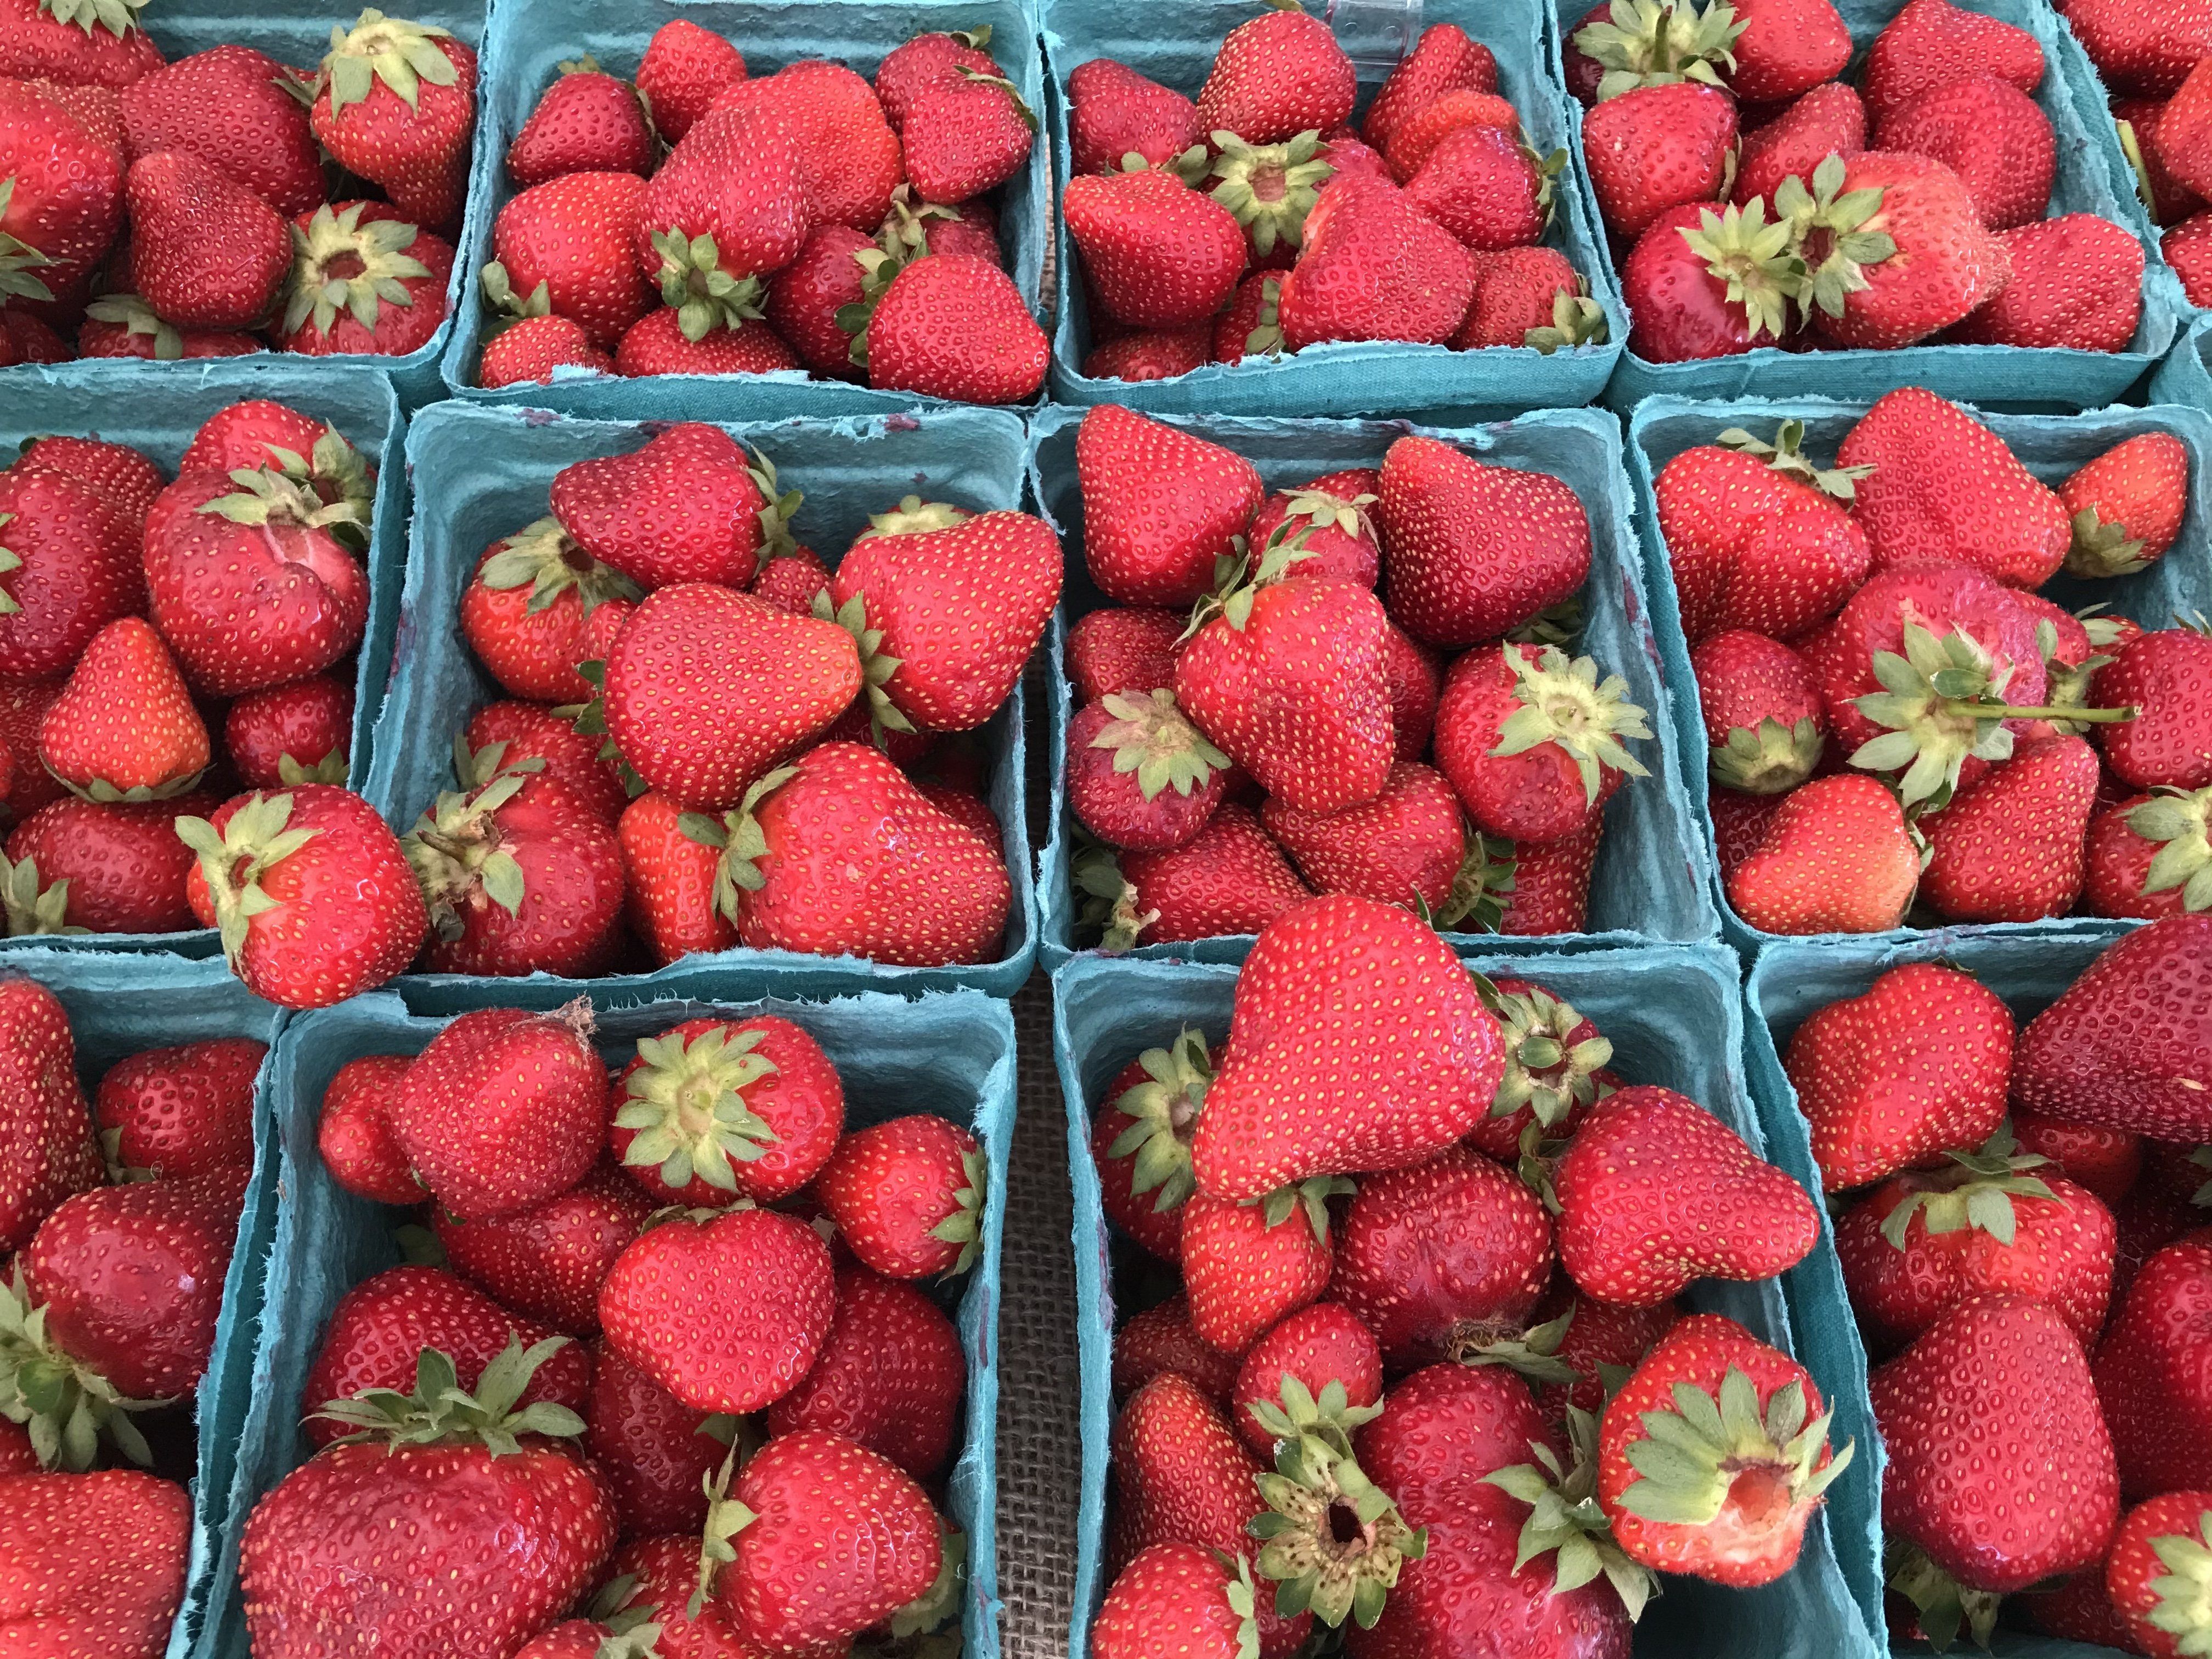 Central Oregon Strawberry Season is Upon us